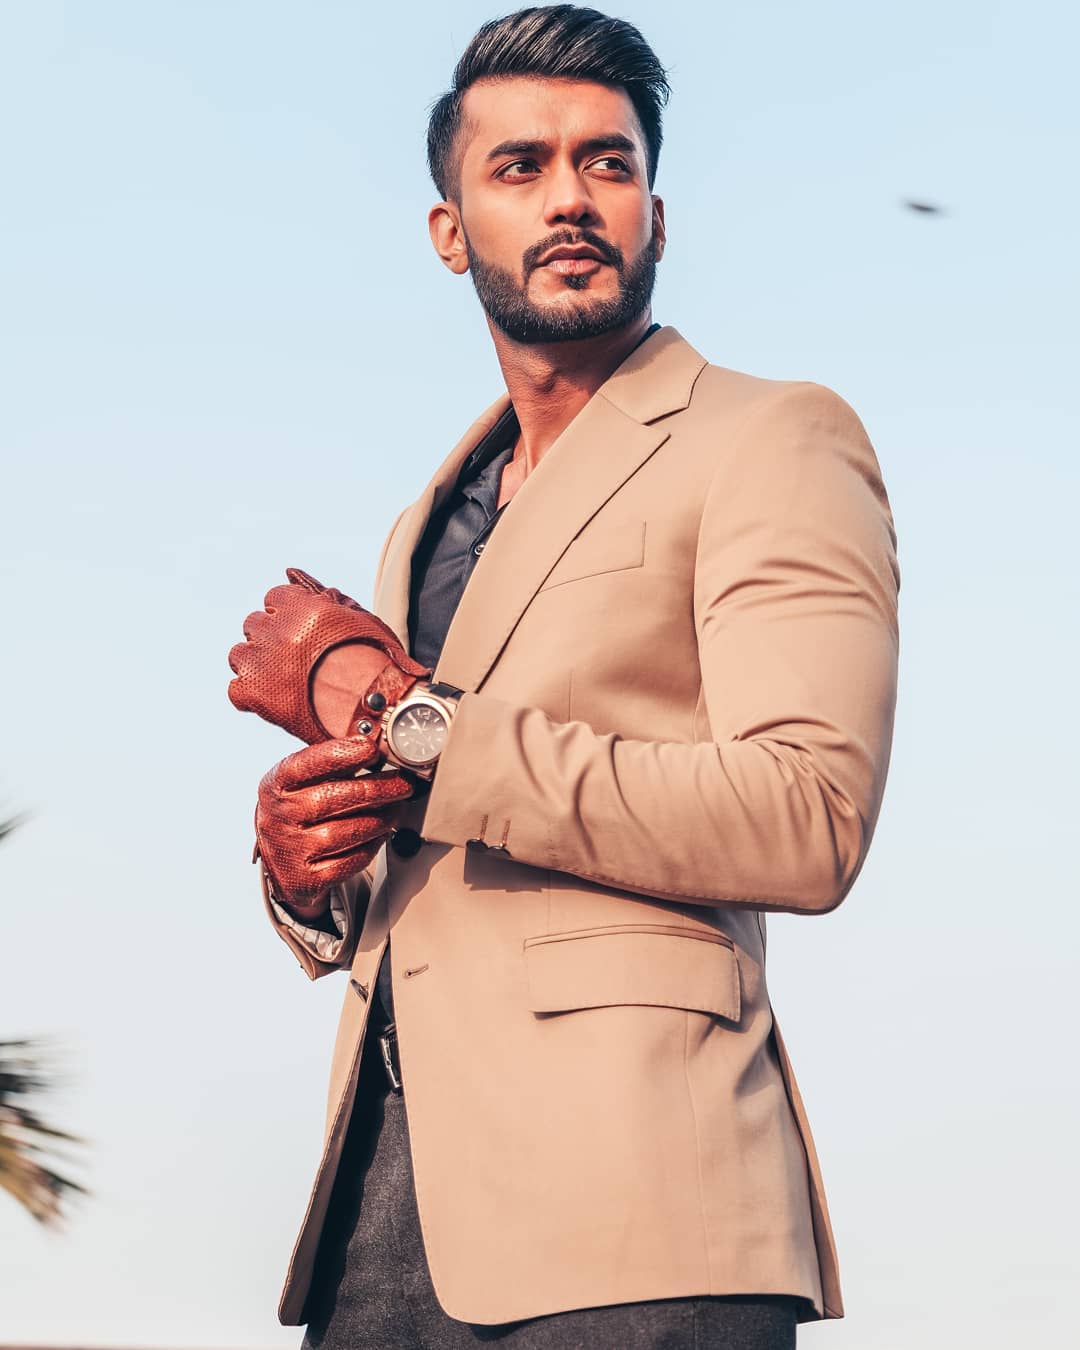 MYNTRA - A light color blazer is an investment piece that is a must-have for dressy and casual looks alike. 📸 @varunverrma
For similar blazer styles, look up product code: 6997065 / 11549850 / 6997069...